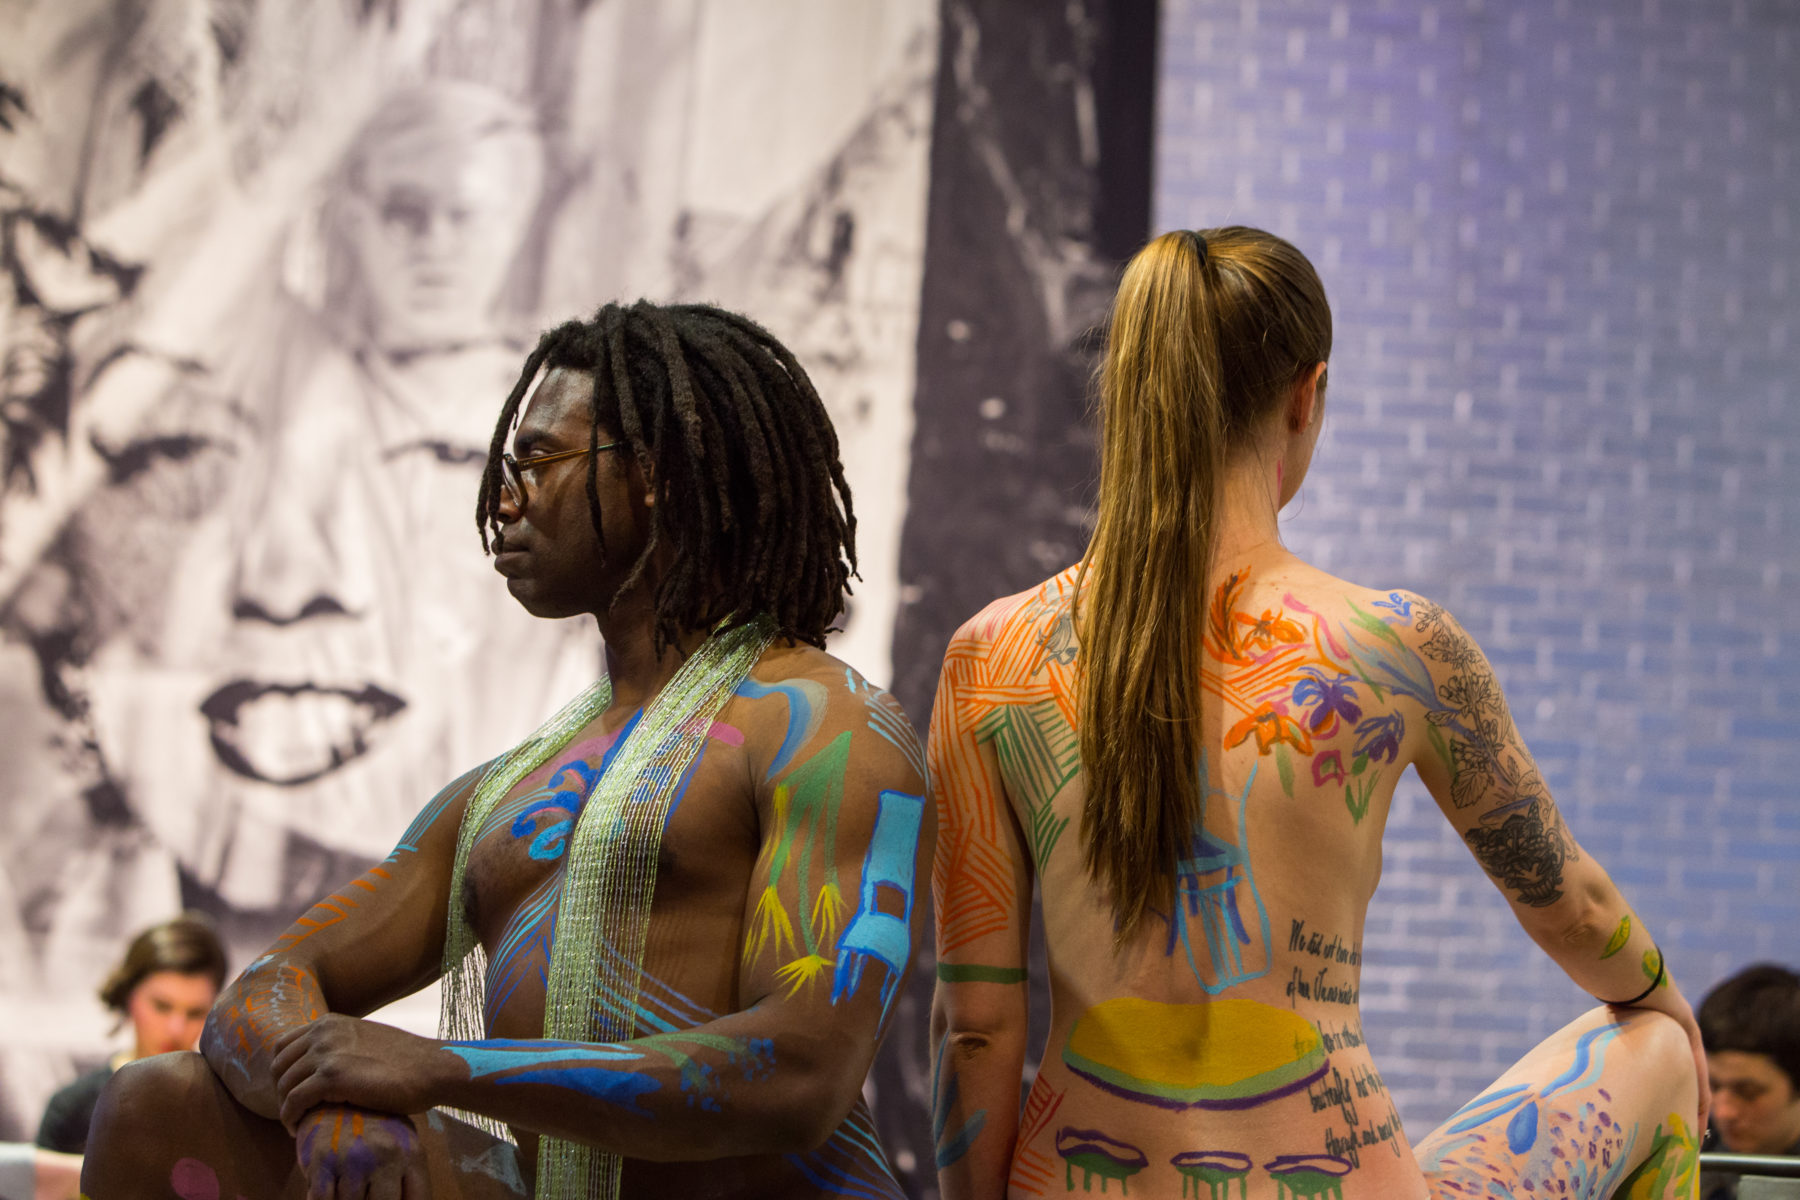 Two models posing in The Warhol entrance space. The model on the left is an African-American man, right hand resting on his propped up knee, his left hand grabbing his right wrist. He is standing back to back with a Caucasian woman, her left arm by her side and right hand grabbing her right propped up knee. Both models have a variety of small pictures painted on them with colorful body paint.